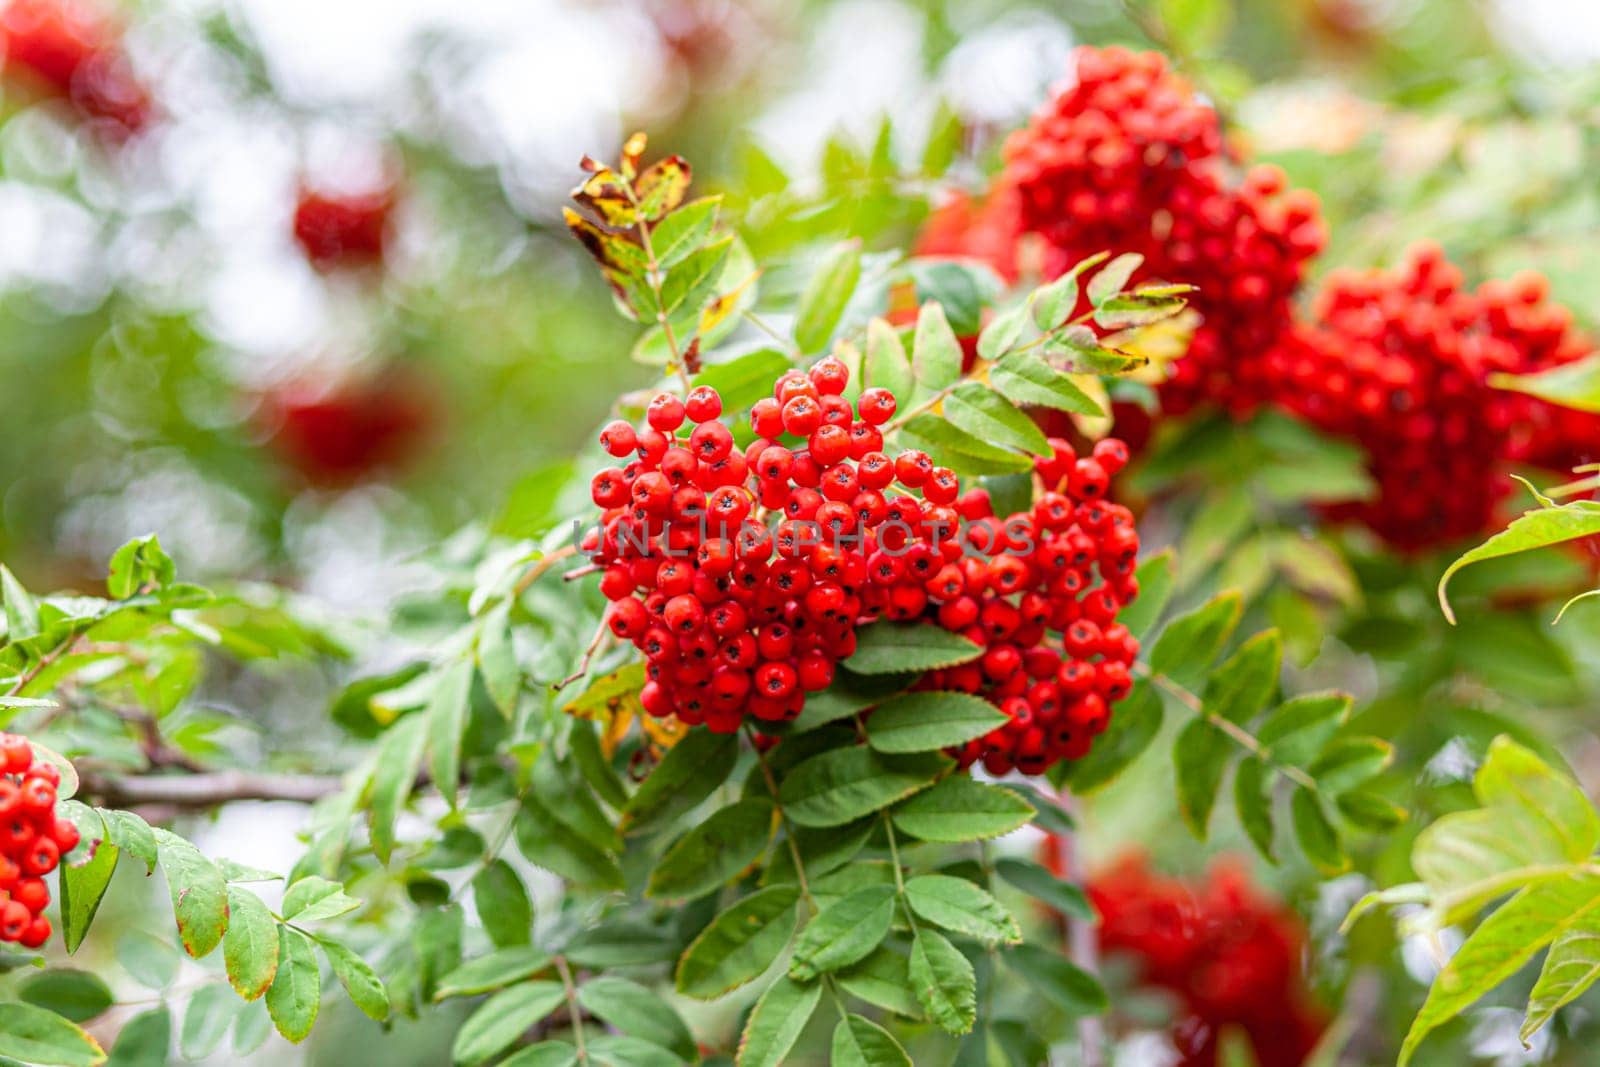 Mountain rowan ash branch berries on blurred green background. by AnatoliiFoto